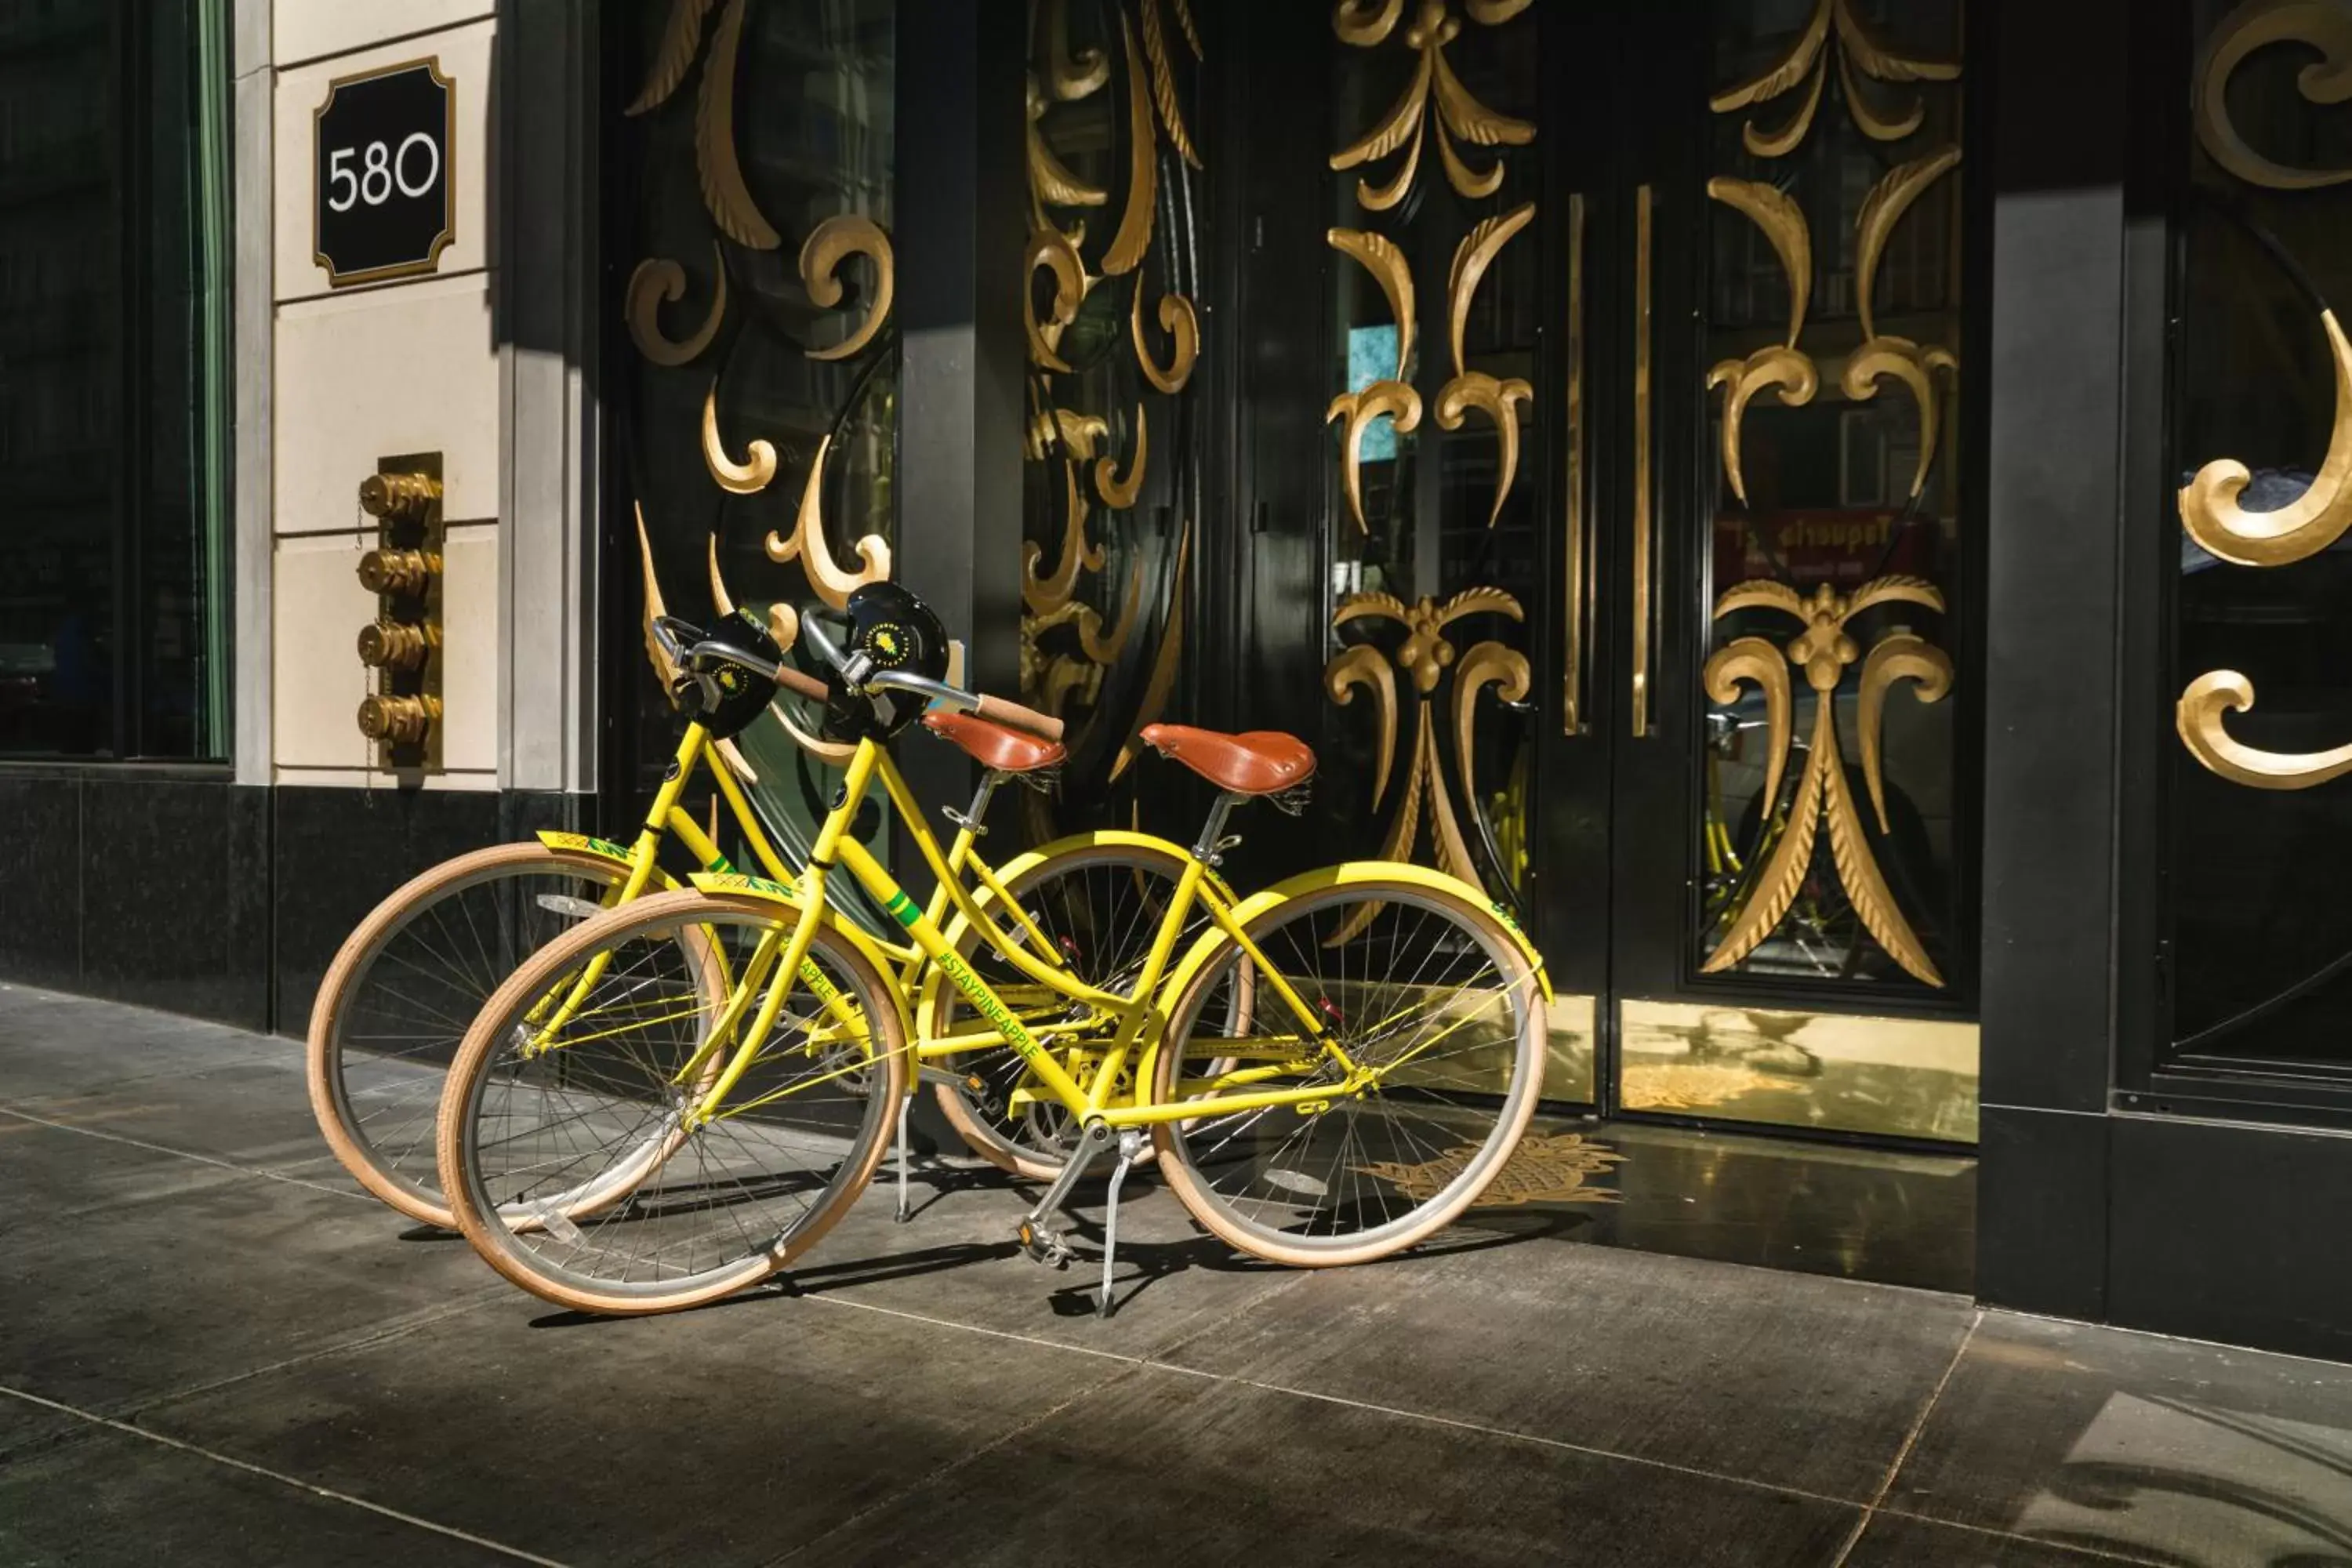 Cycling in Staypineapple, An Elegant Hotel, Union Square